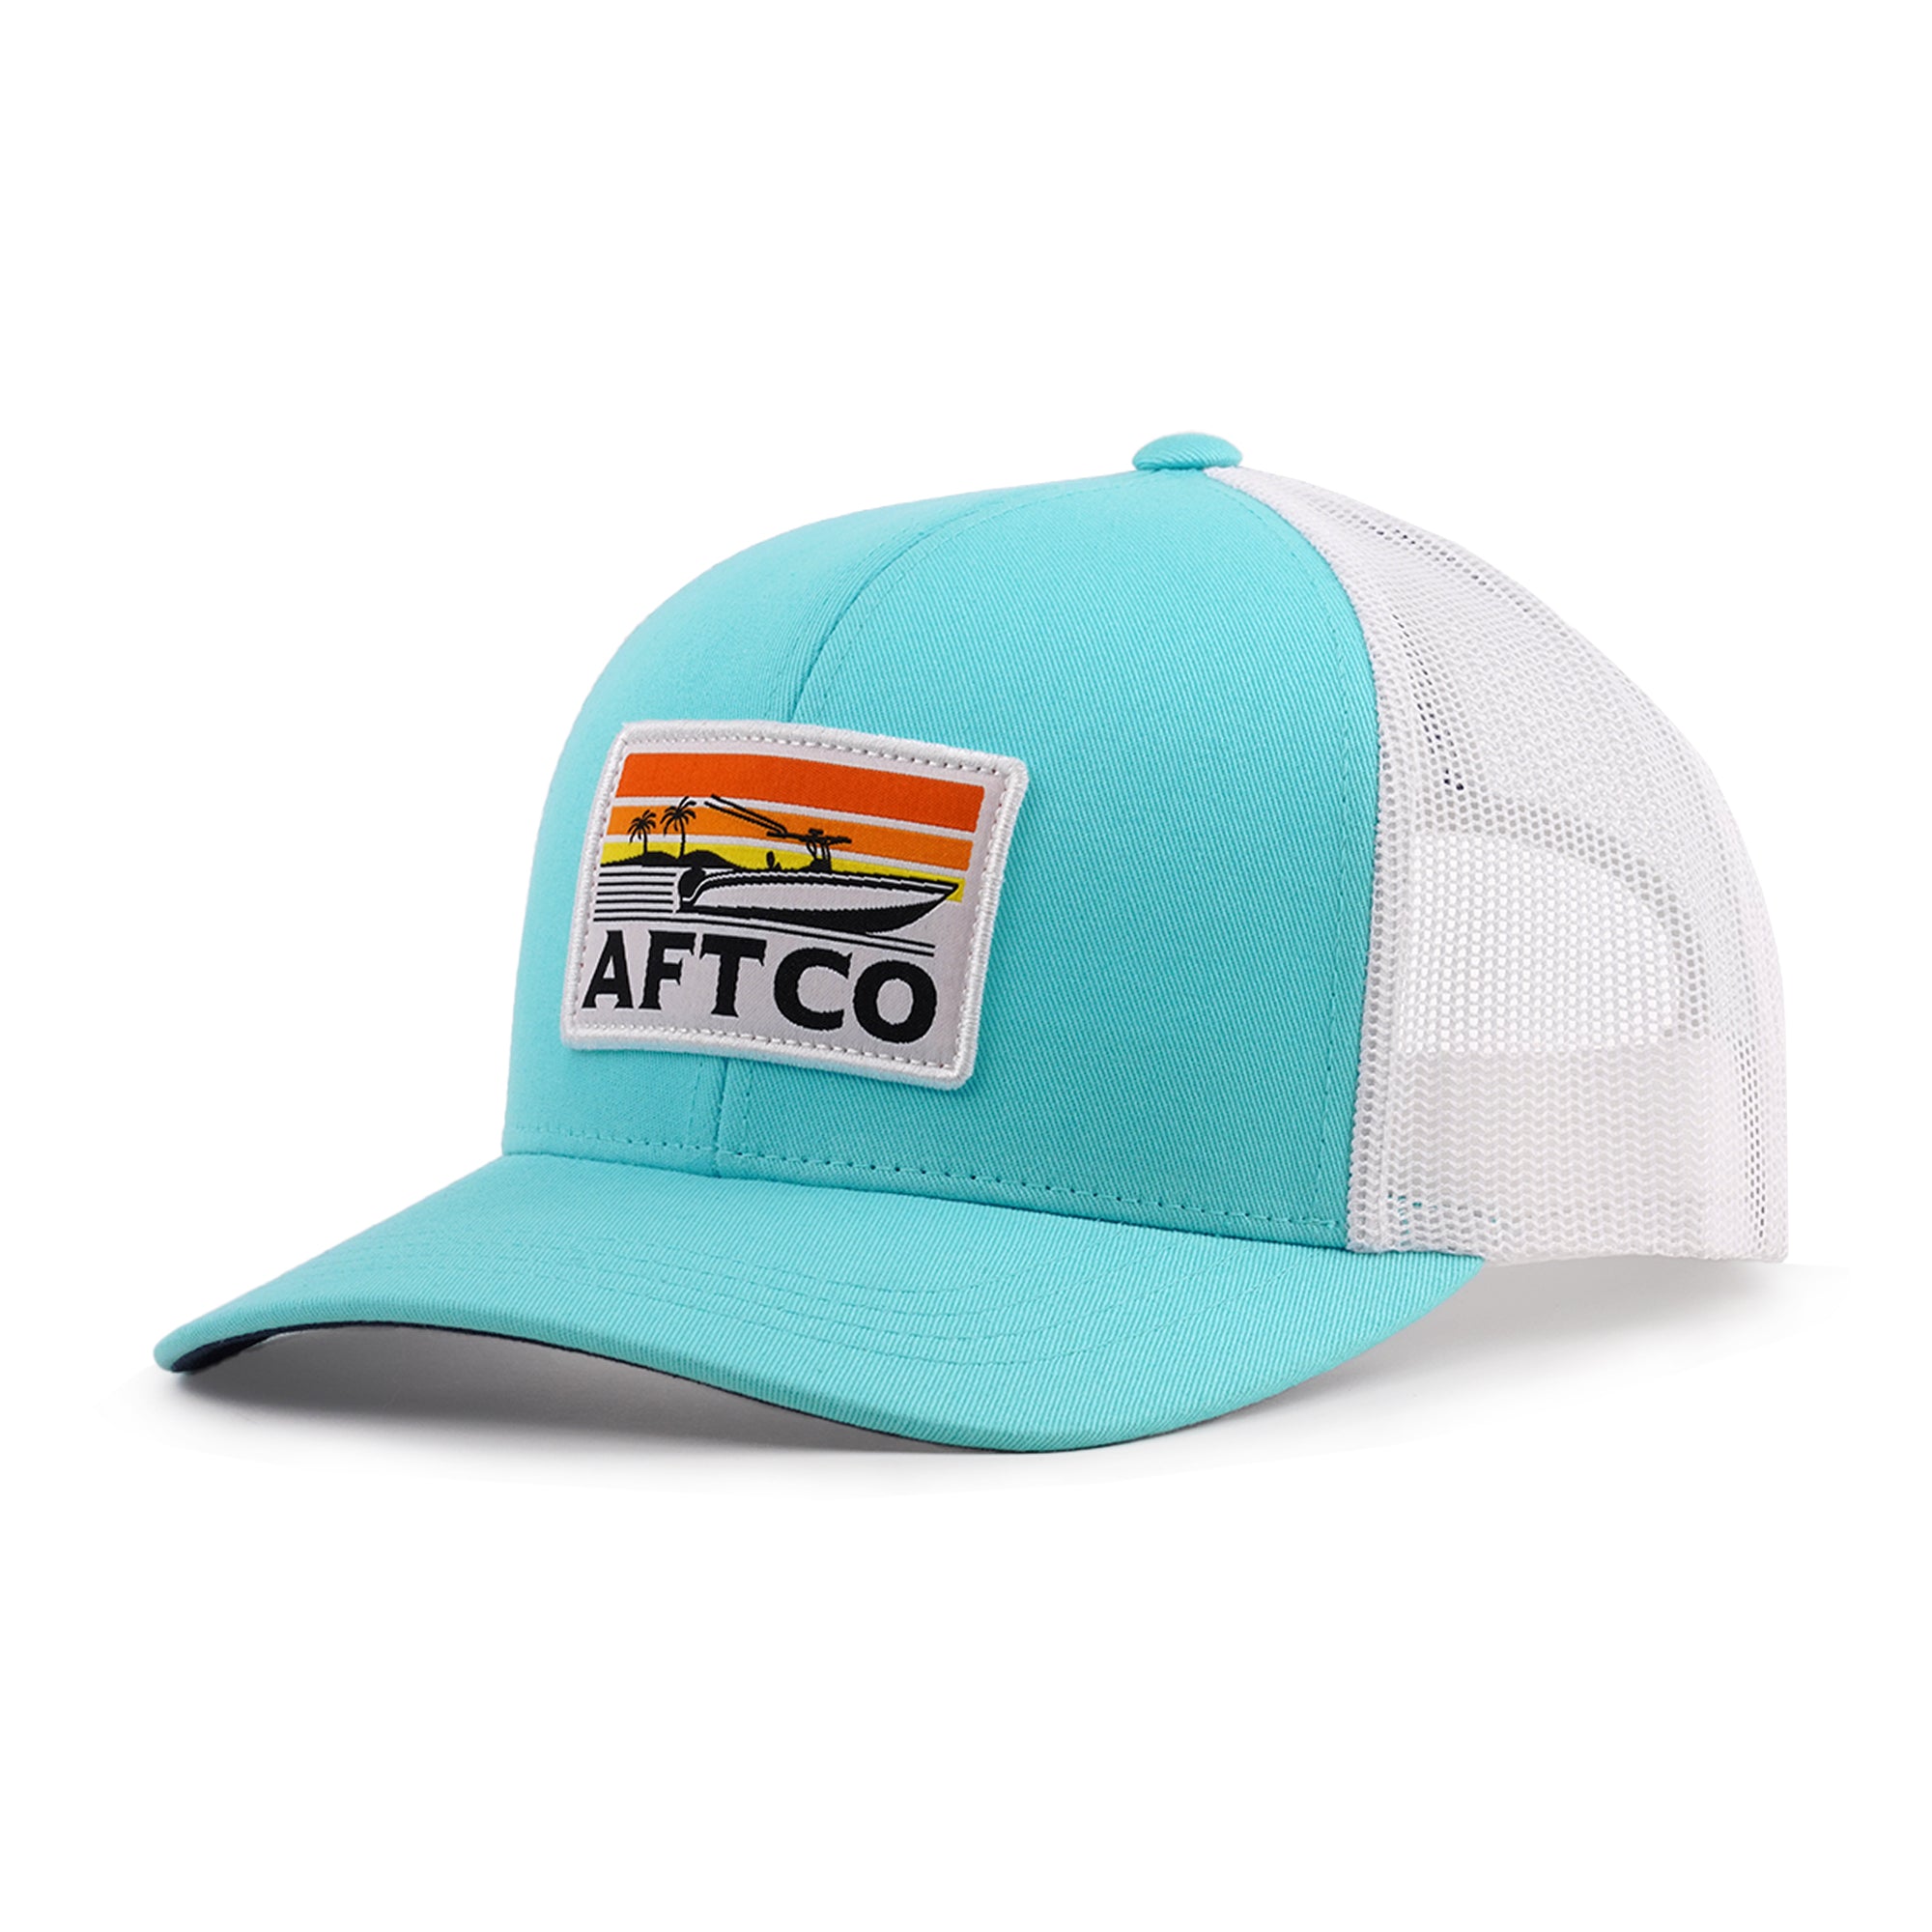 AFTCO American Fishing Tackle Co Upstream Trucker Hat Blue One Size 0063